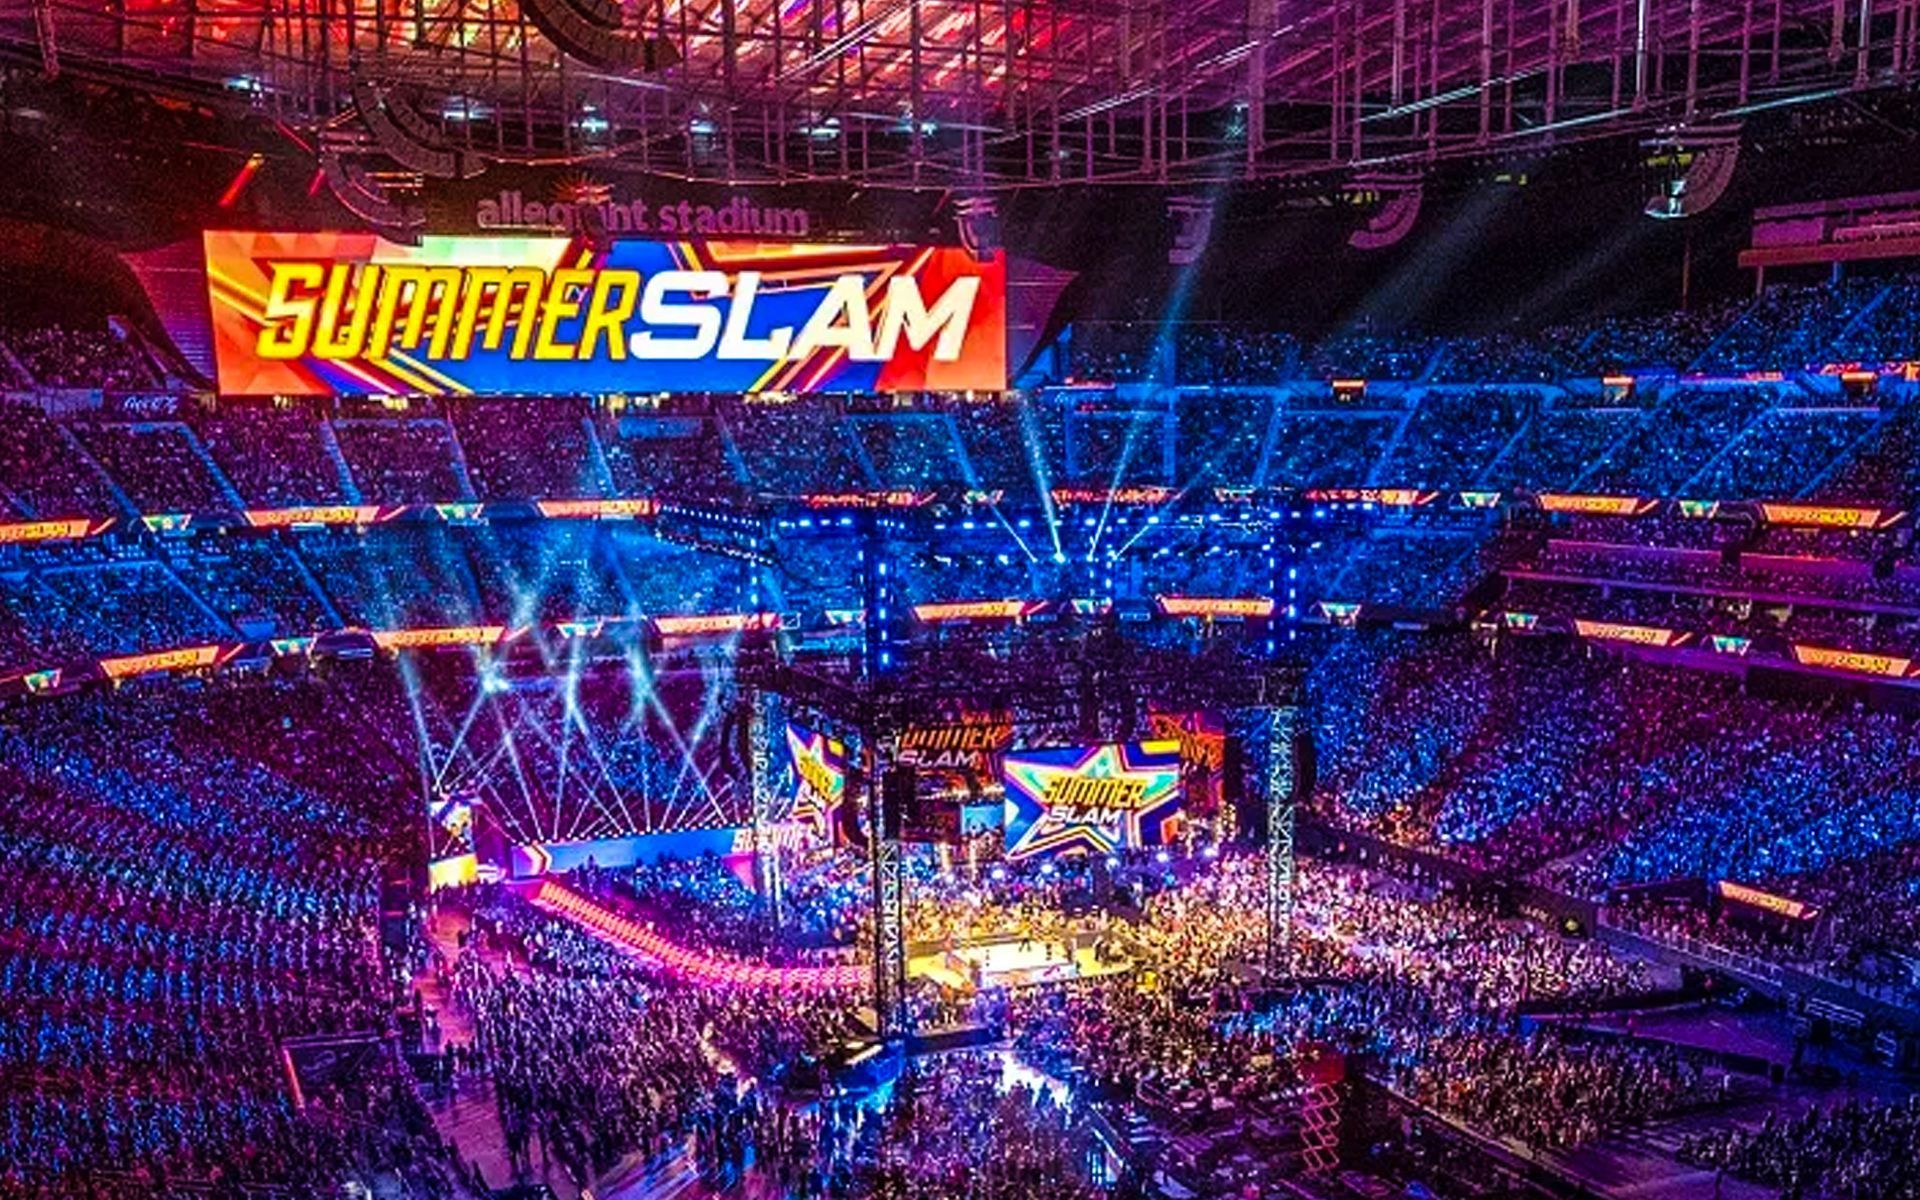 Summerslam 2023 will be held on August 5, 2023, at Ford Field in Detroit.